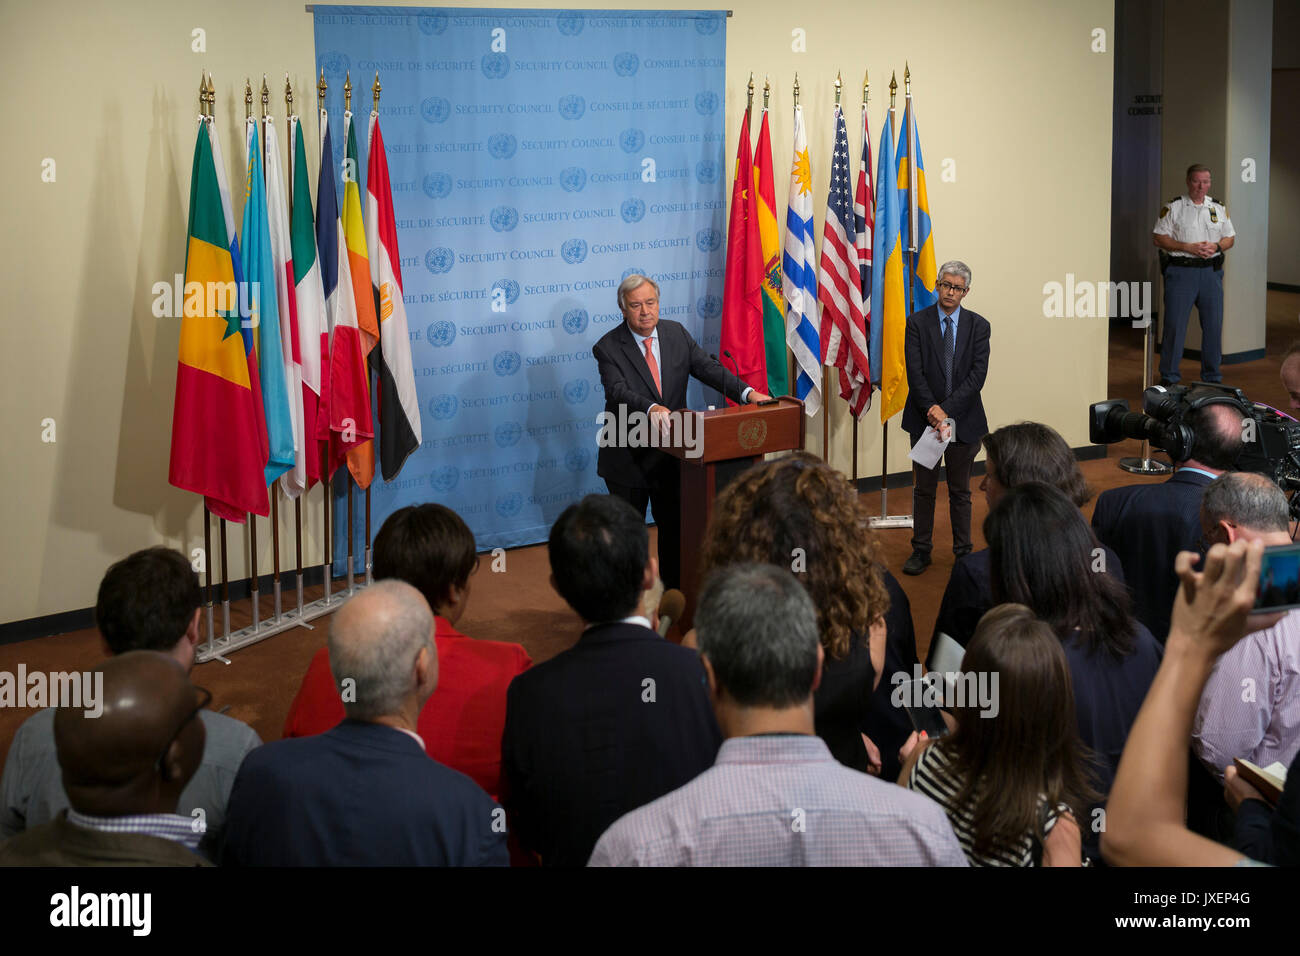 United Nations. 16th Aug, 2017. United Nations Secretary-General Antonio Guterres (C) speaks to the press during a media encounter at the UN headquarters in New York, Aug. 16, 2017. UN Secretary-General Antonio Guterres said Wednesday that the Democratic People's Republic of Korea (DPRK) should "fully comply with international obligations" and "engage in a credible and meaningful dialogue" in order to defuse tensions on the Korean Peninsula. Credit: Li Muzi/Xinhua/Alamy Live News Stock Photo